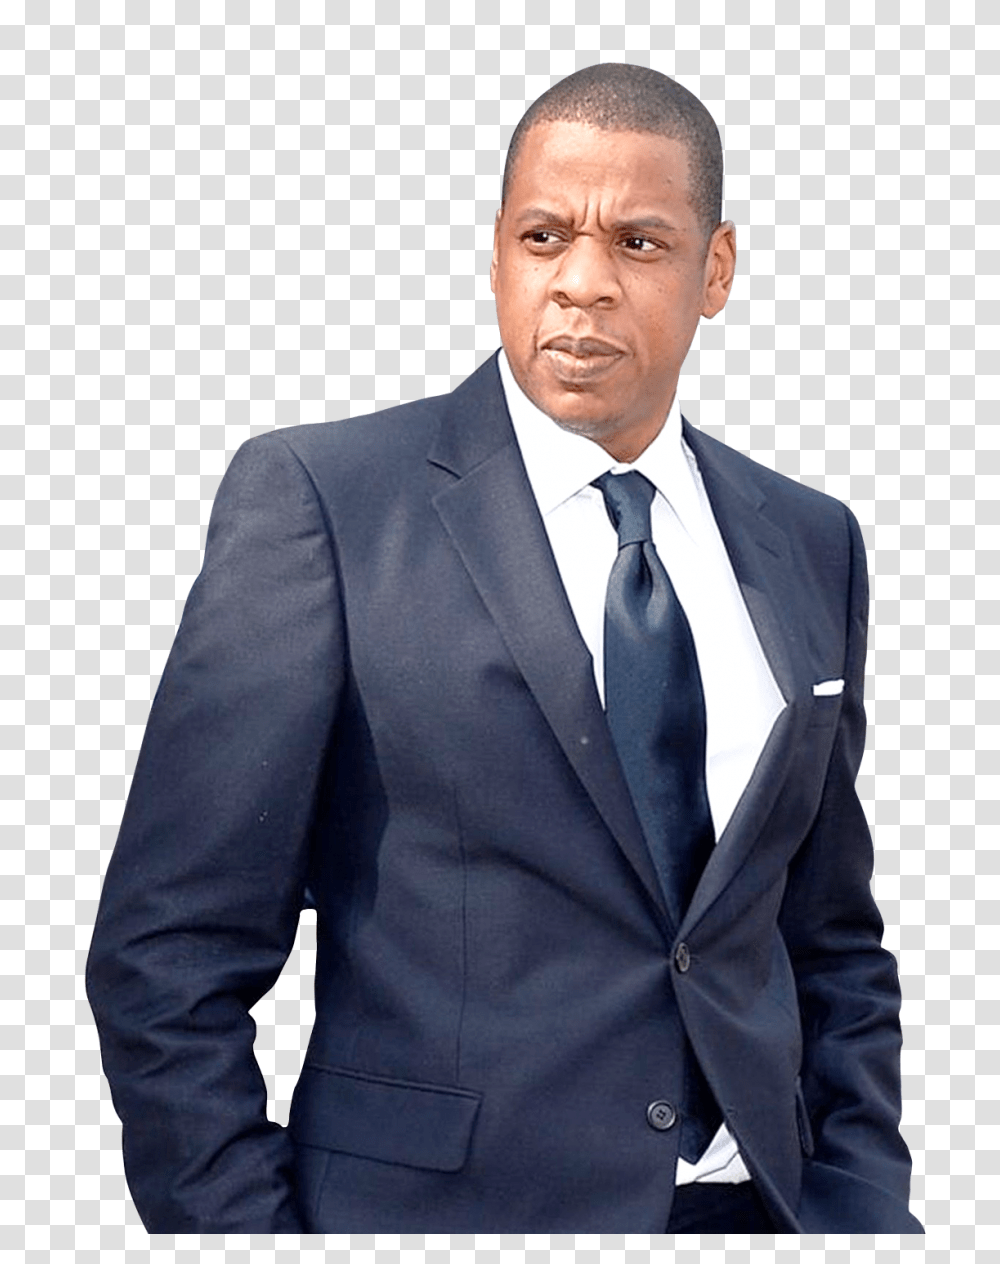 Jay Z Image, Celebrity, Tie, Accessories, Accessory Transparent Png